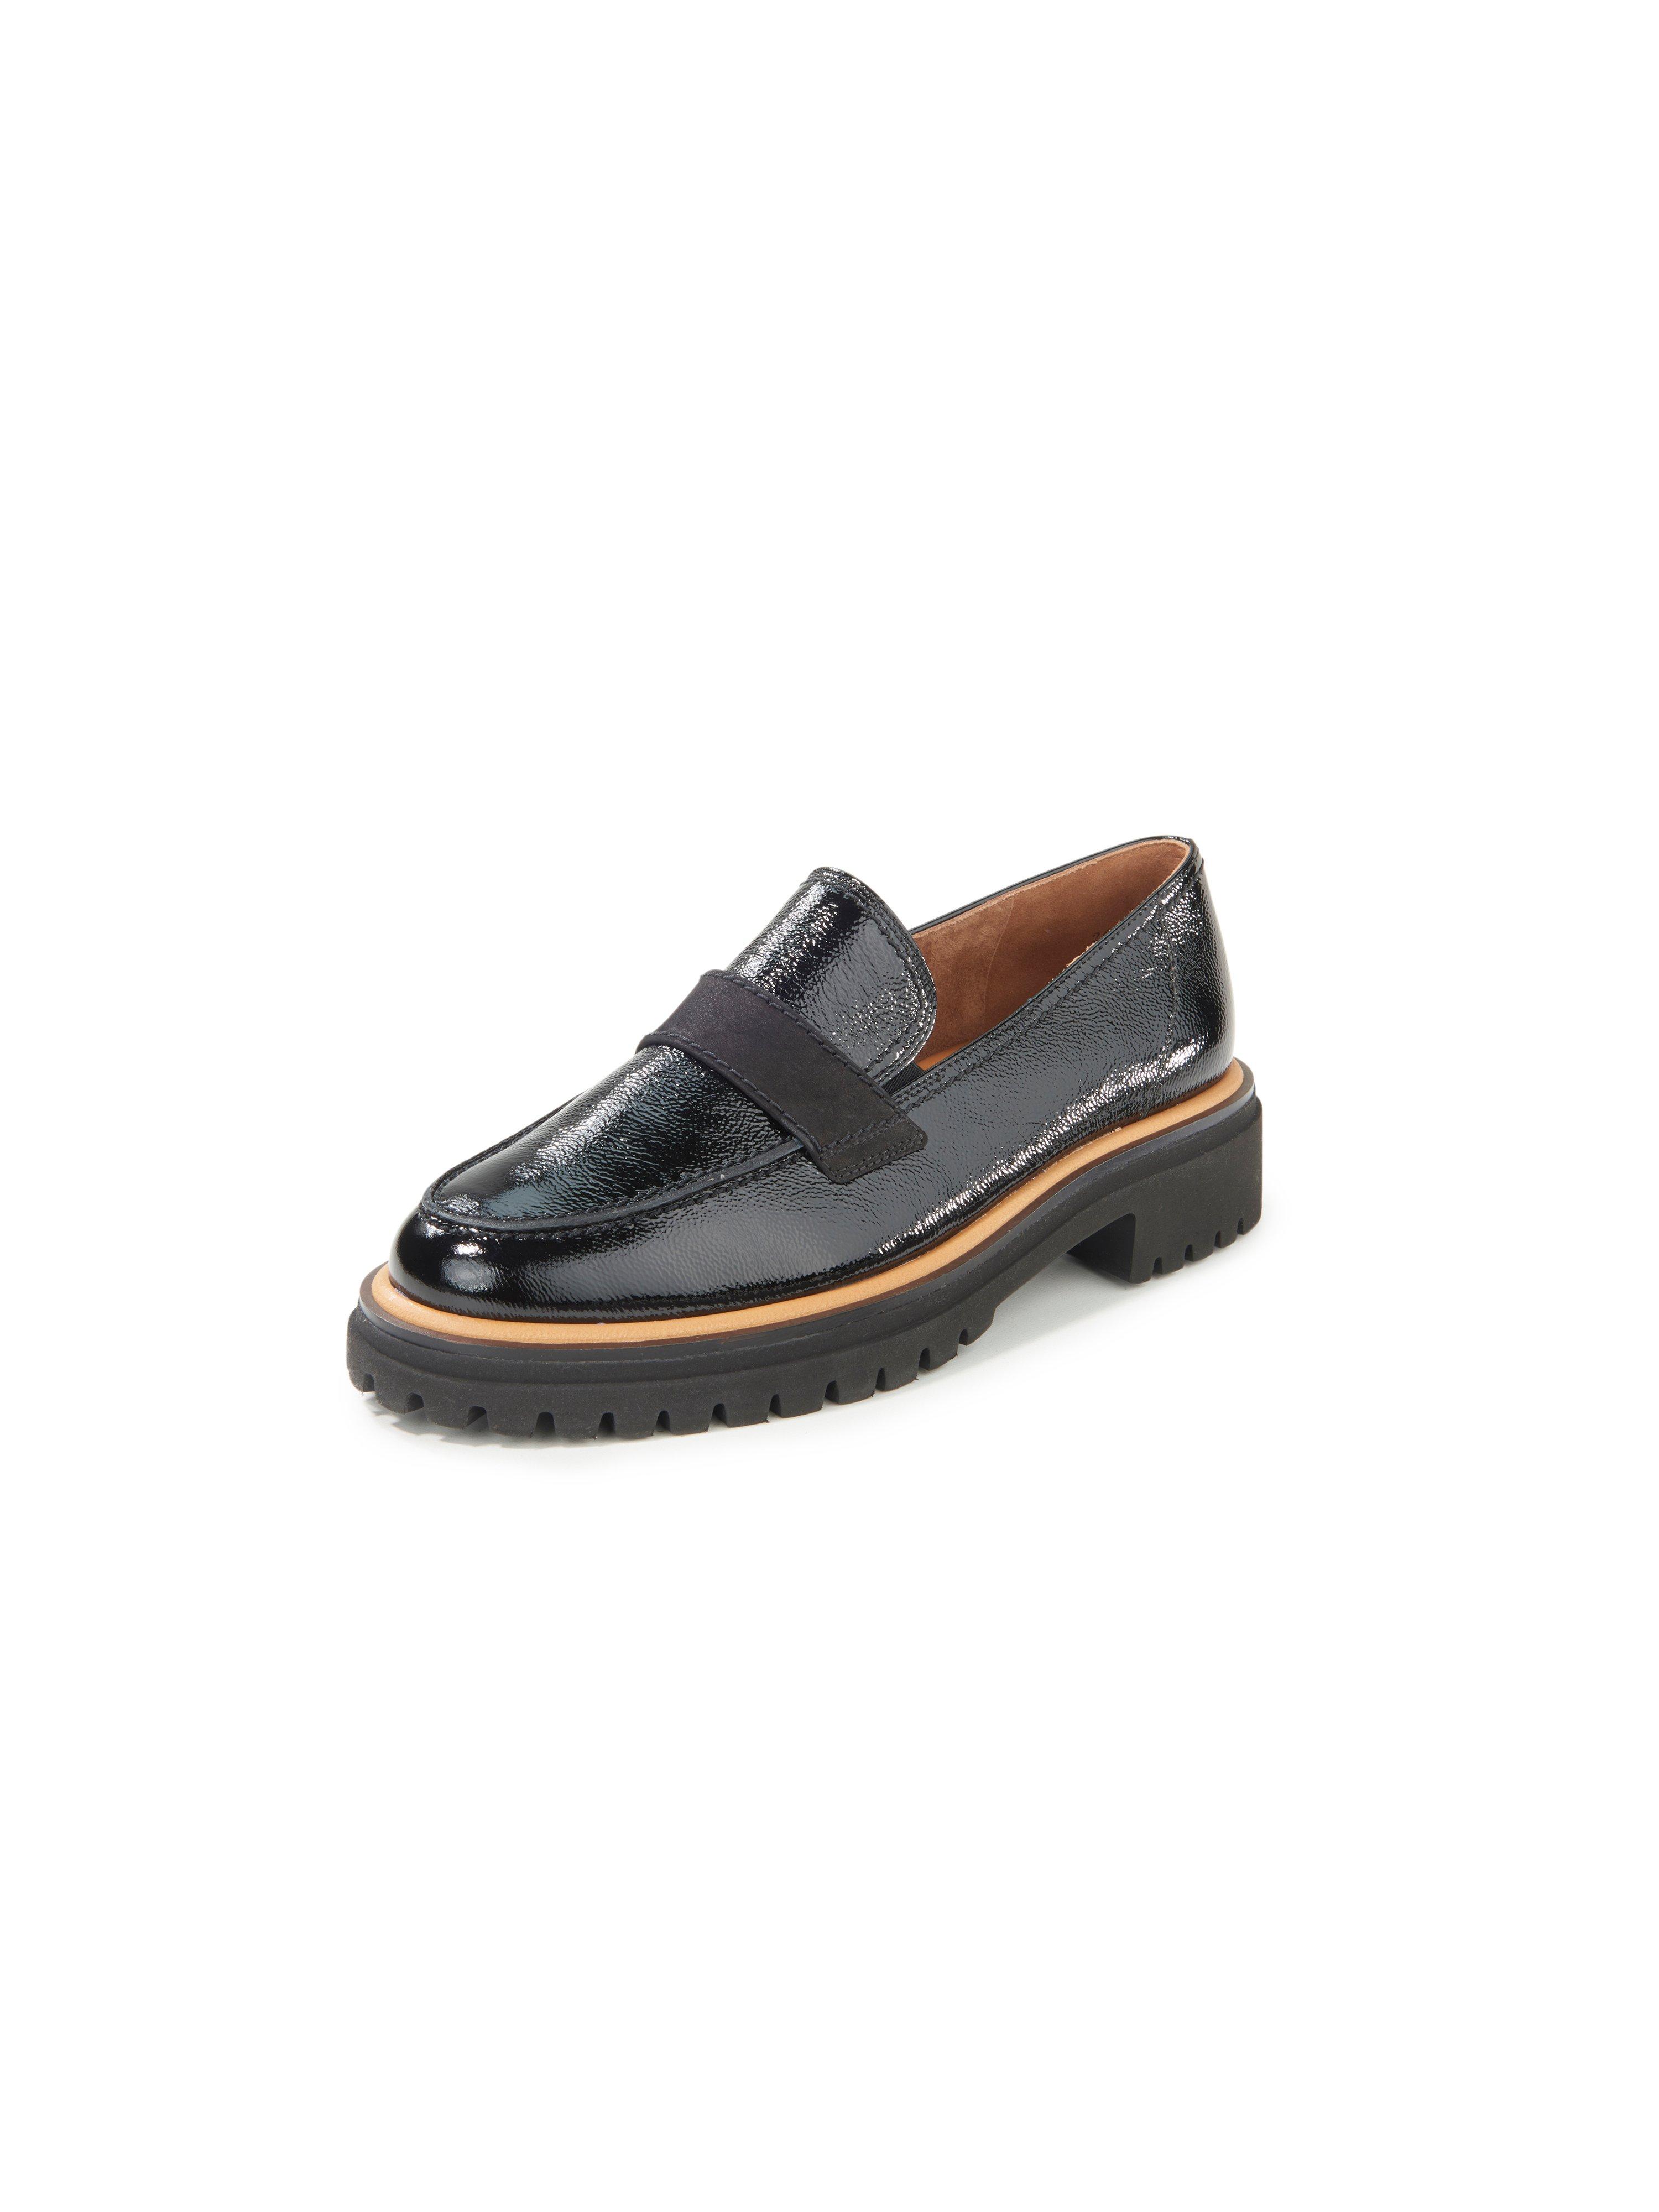 Paul Green - Loafers made of calf patent leather - black